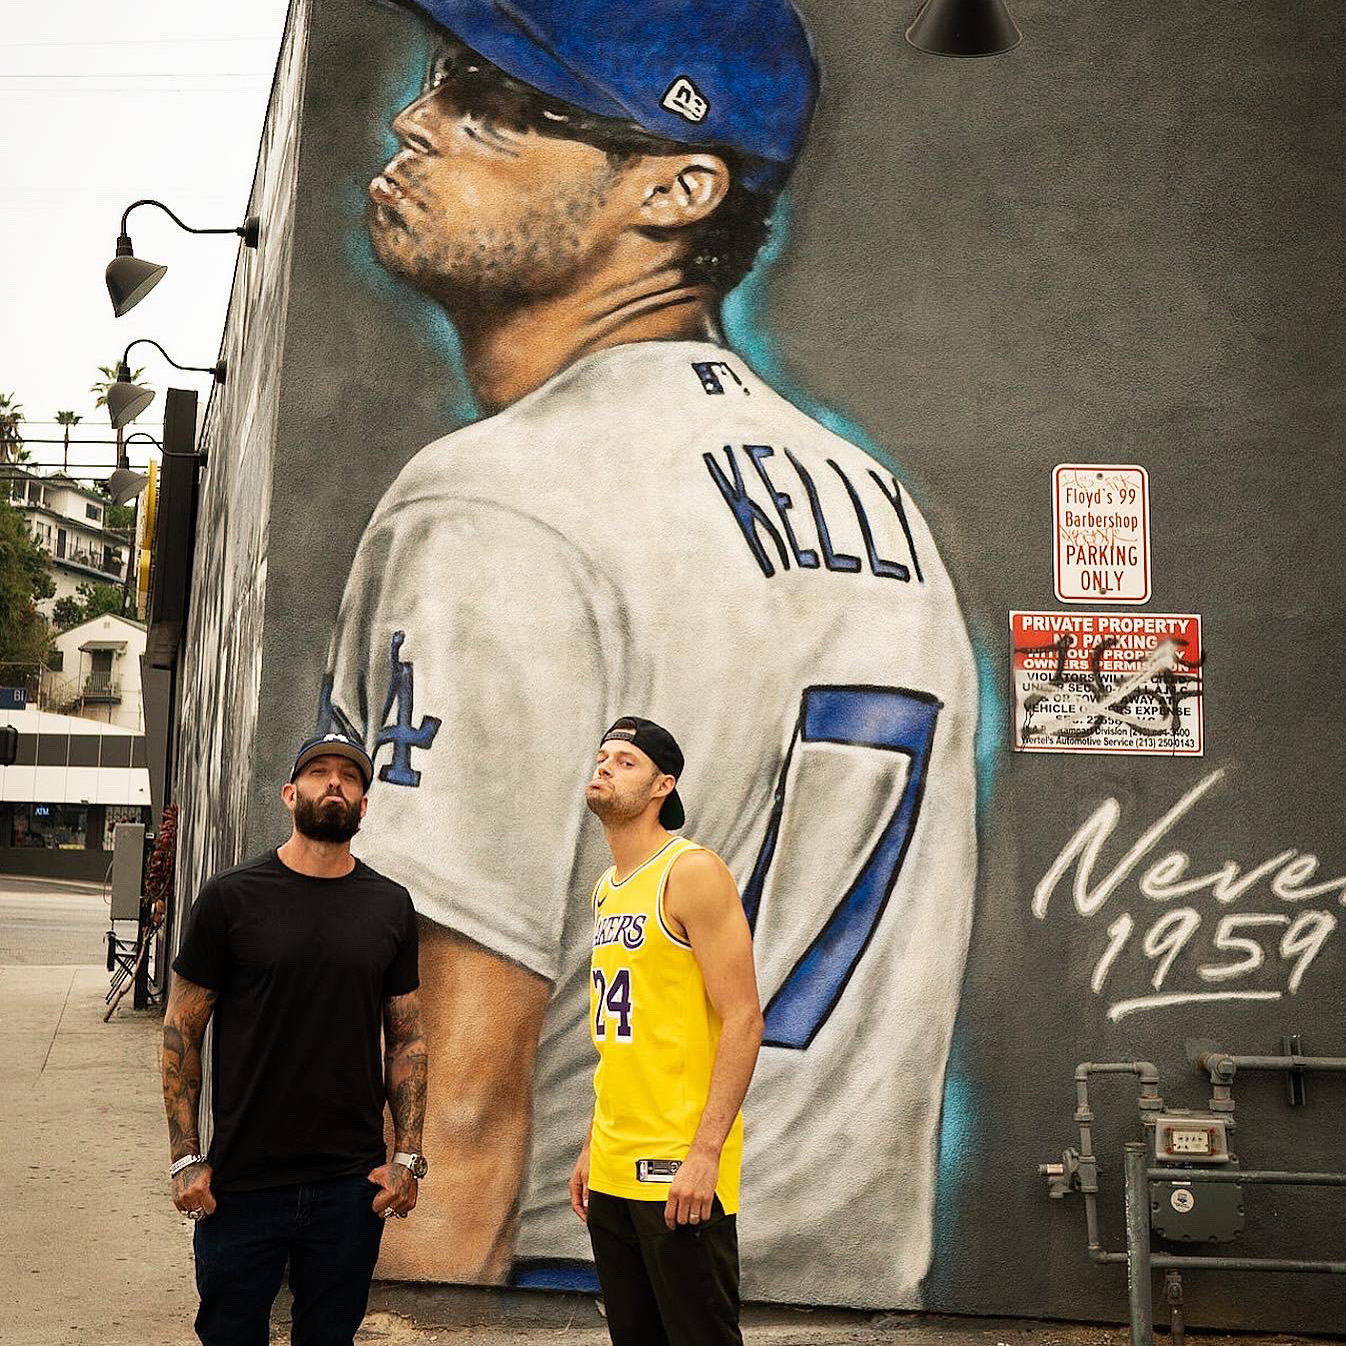 Joe Kelly went to the Joe Kelly mural and made the Joe Kelly face, This is  the Loop